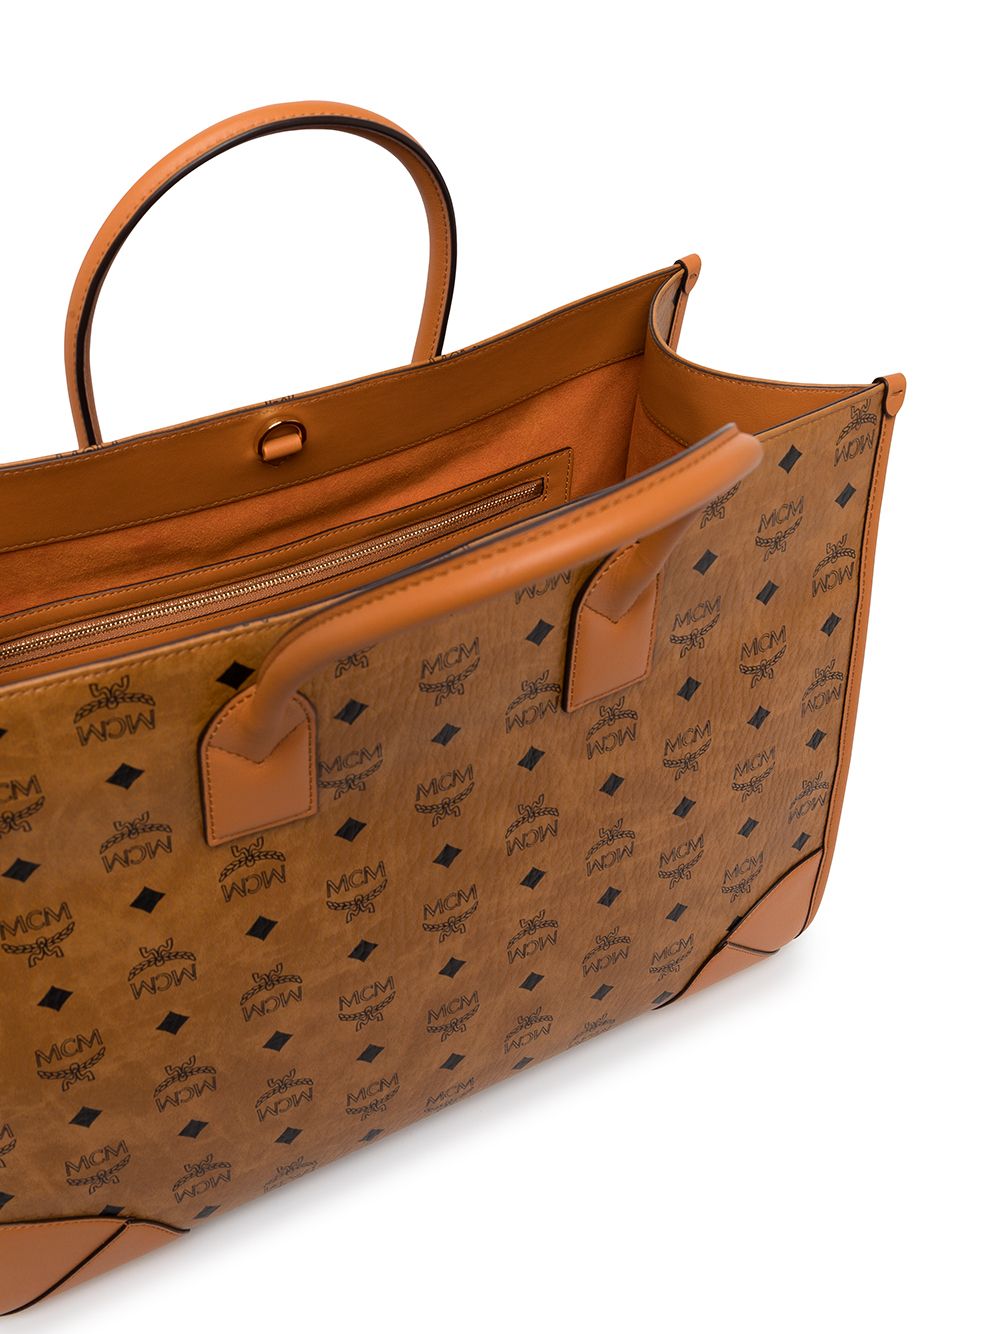 Mcm Munchen Large Tote